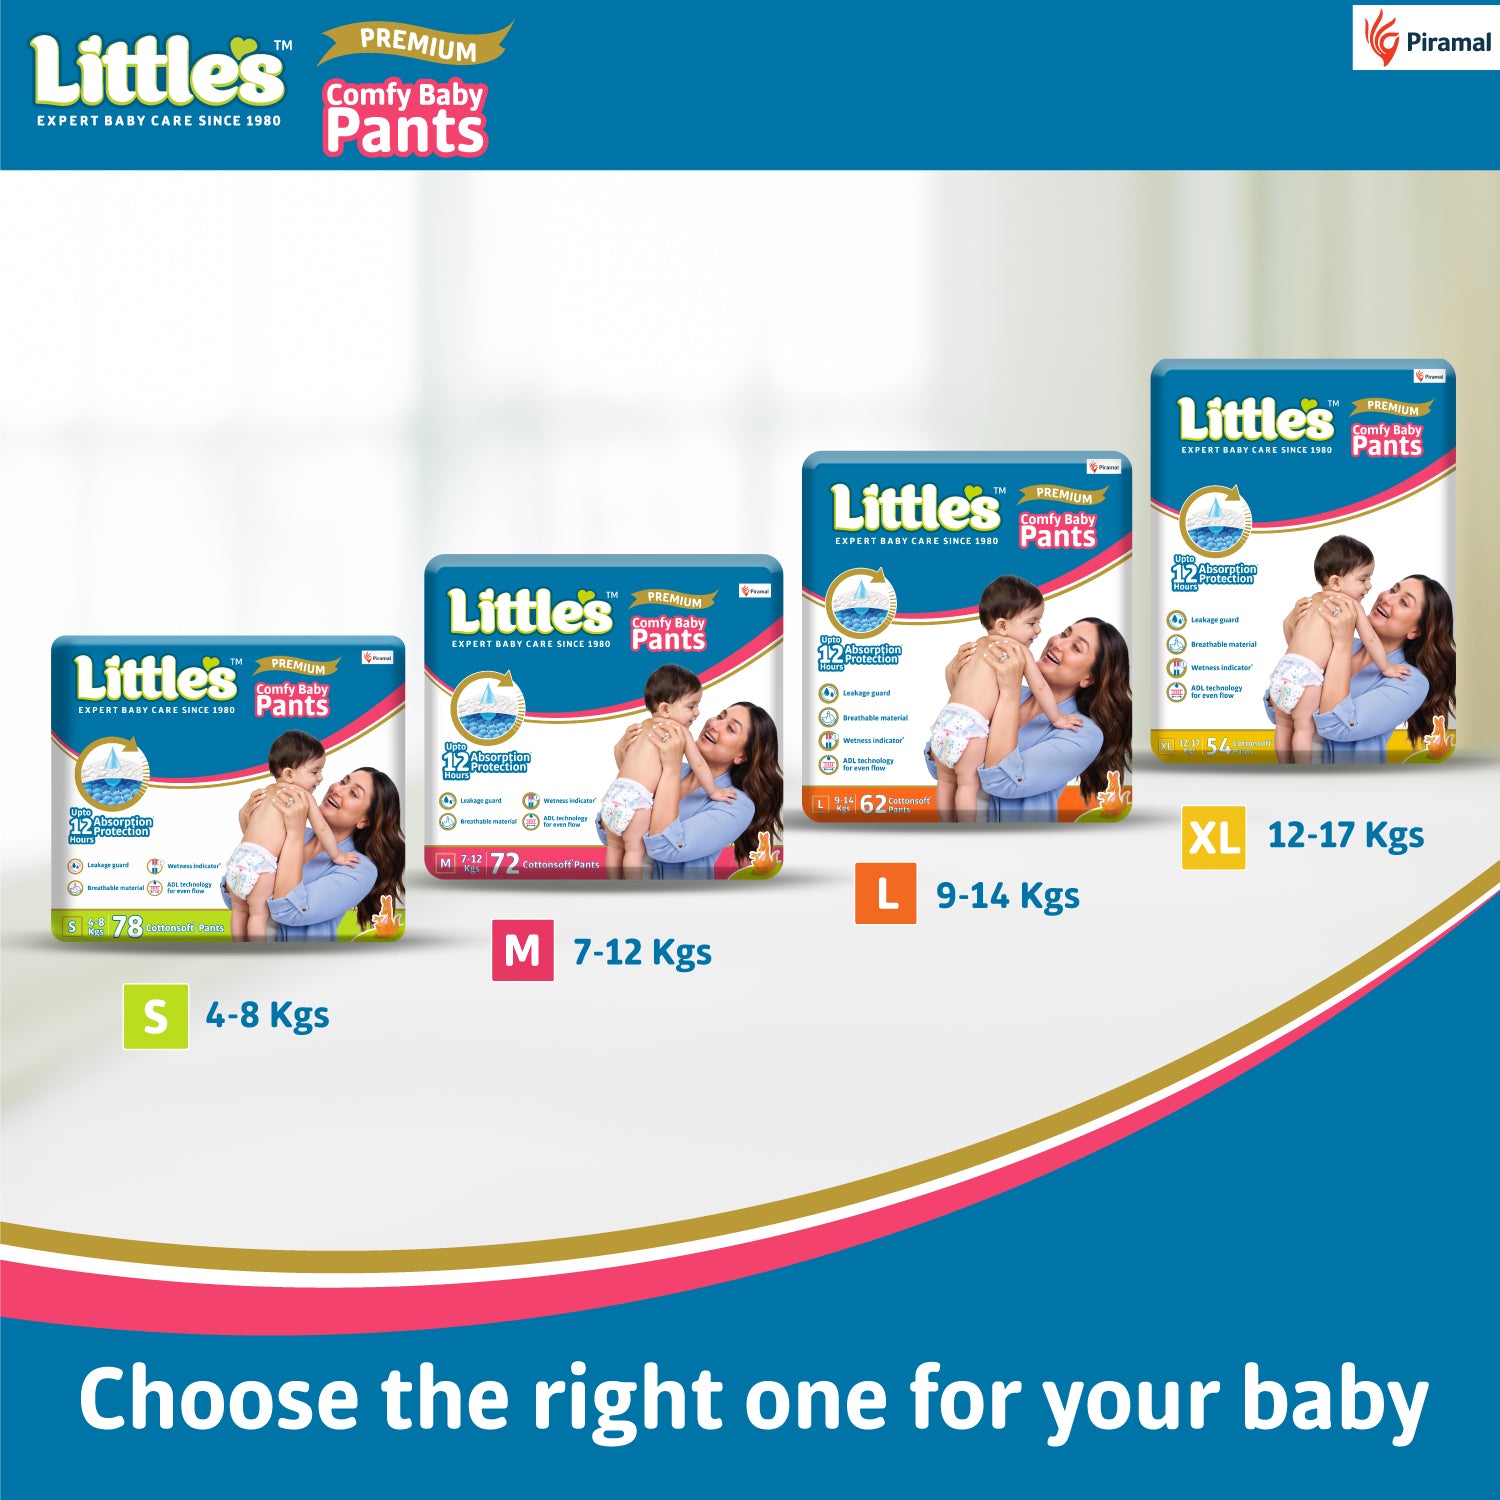 Little's Baby Pants Diapers with Wetness Indicator & 12 Hours Absorption, cottonsoft pants diaper